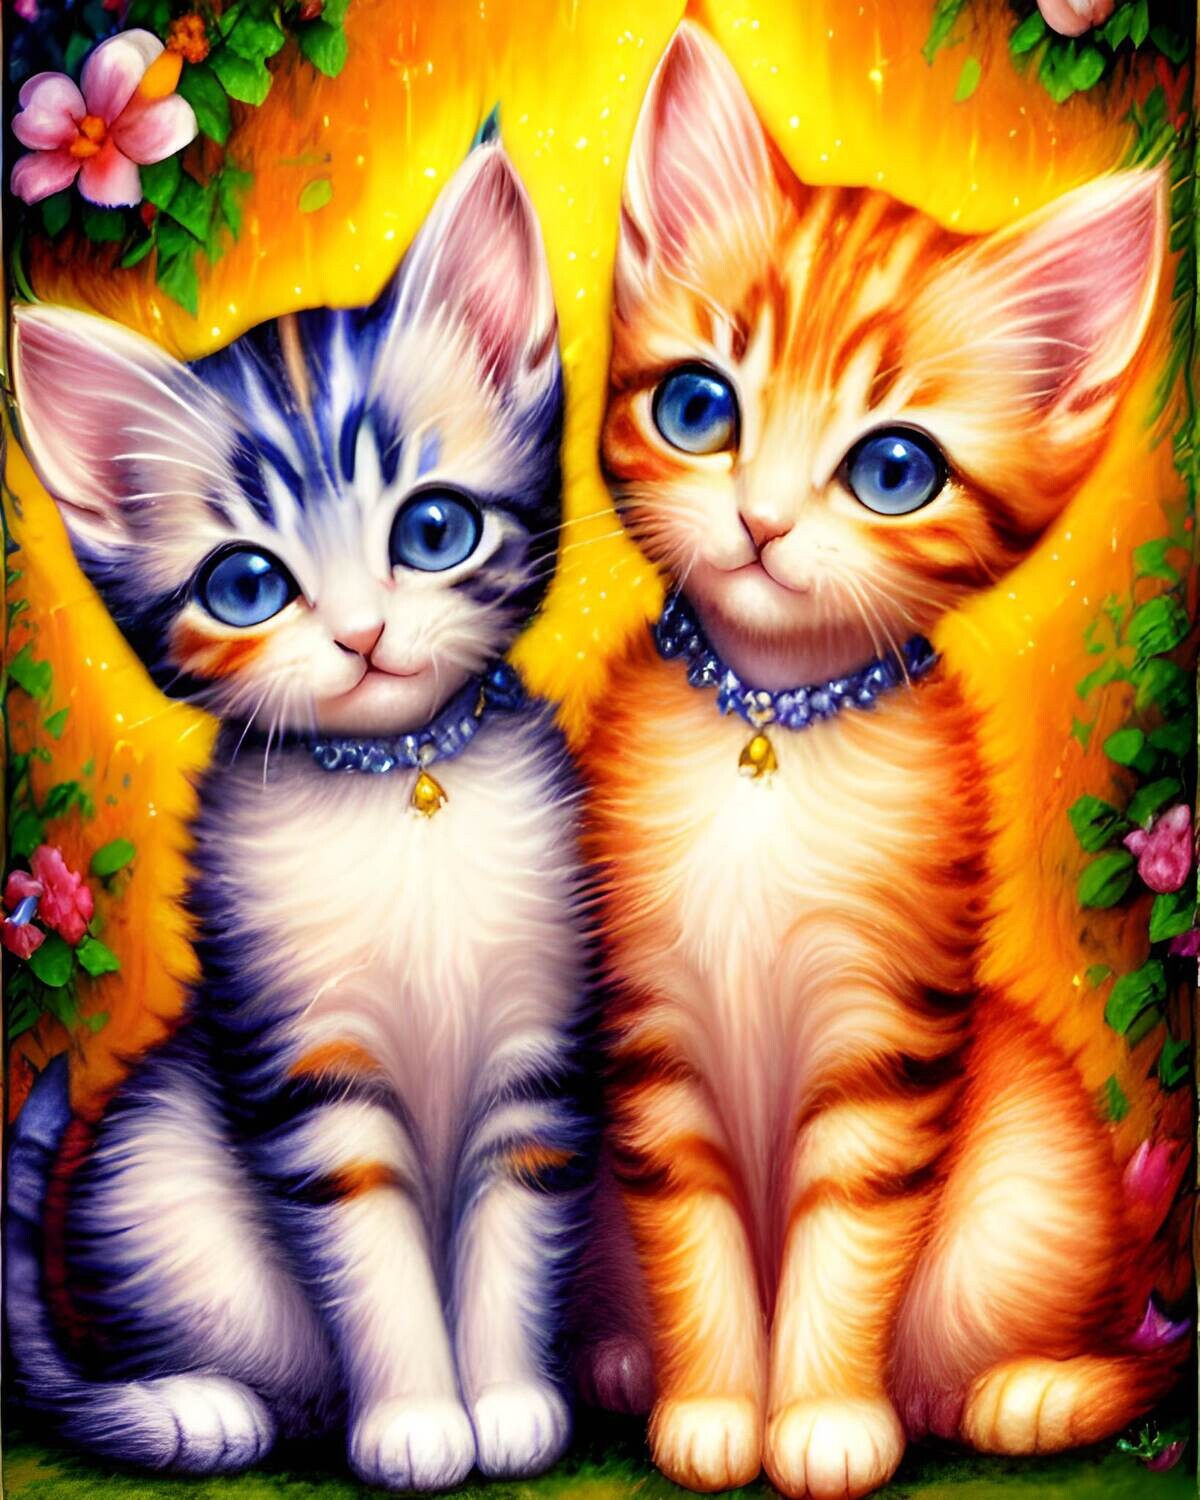 Pair of Kittens - Specially ordered for you. Delivery is approximately 4 - 6 weeks.